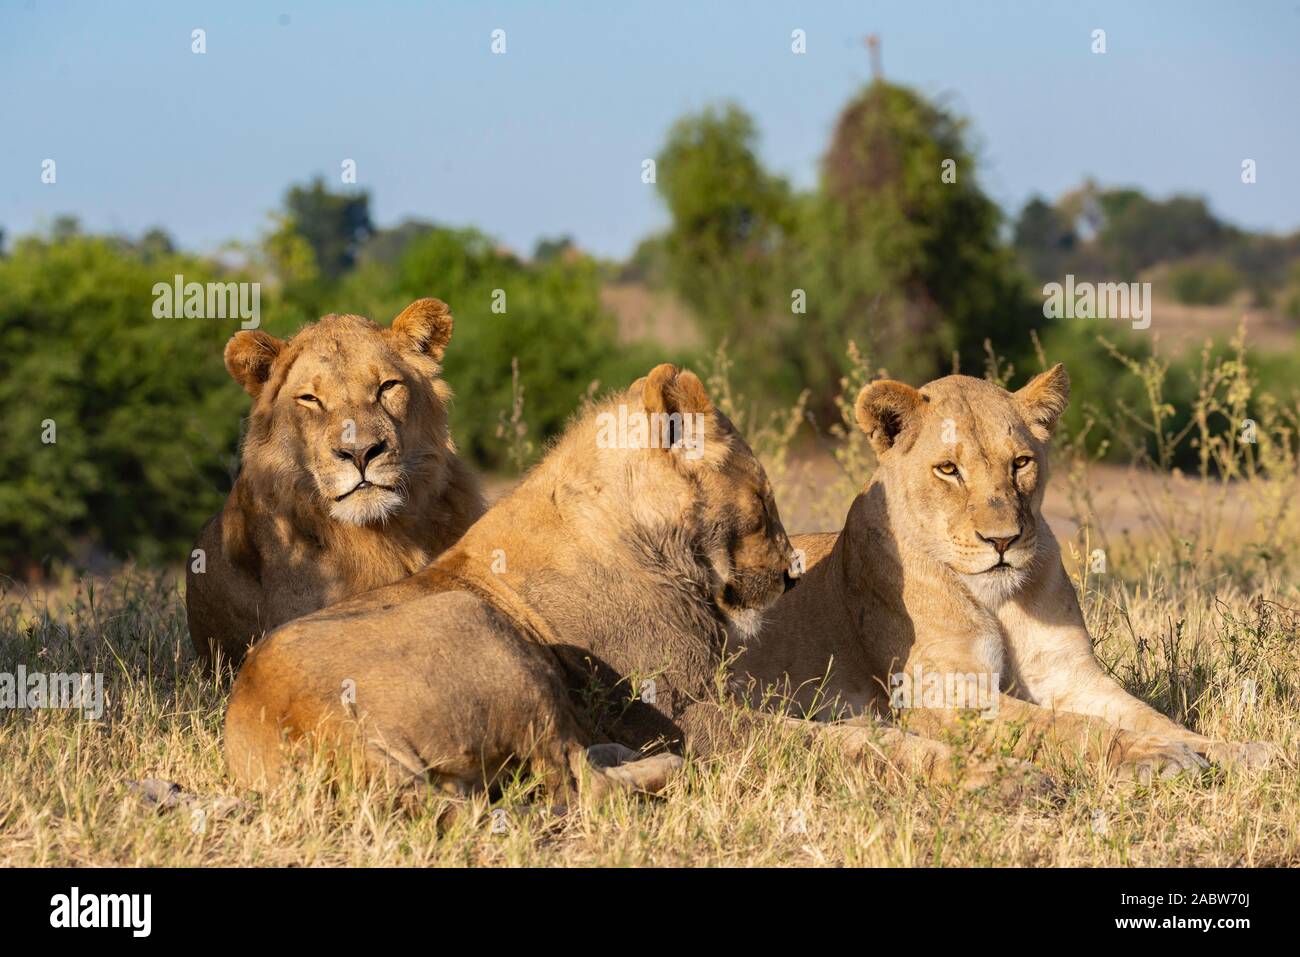 a family of three lions relaxing in the grass of the african savannah Stock Photo